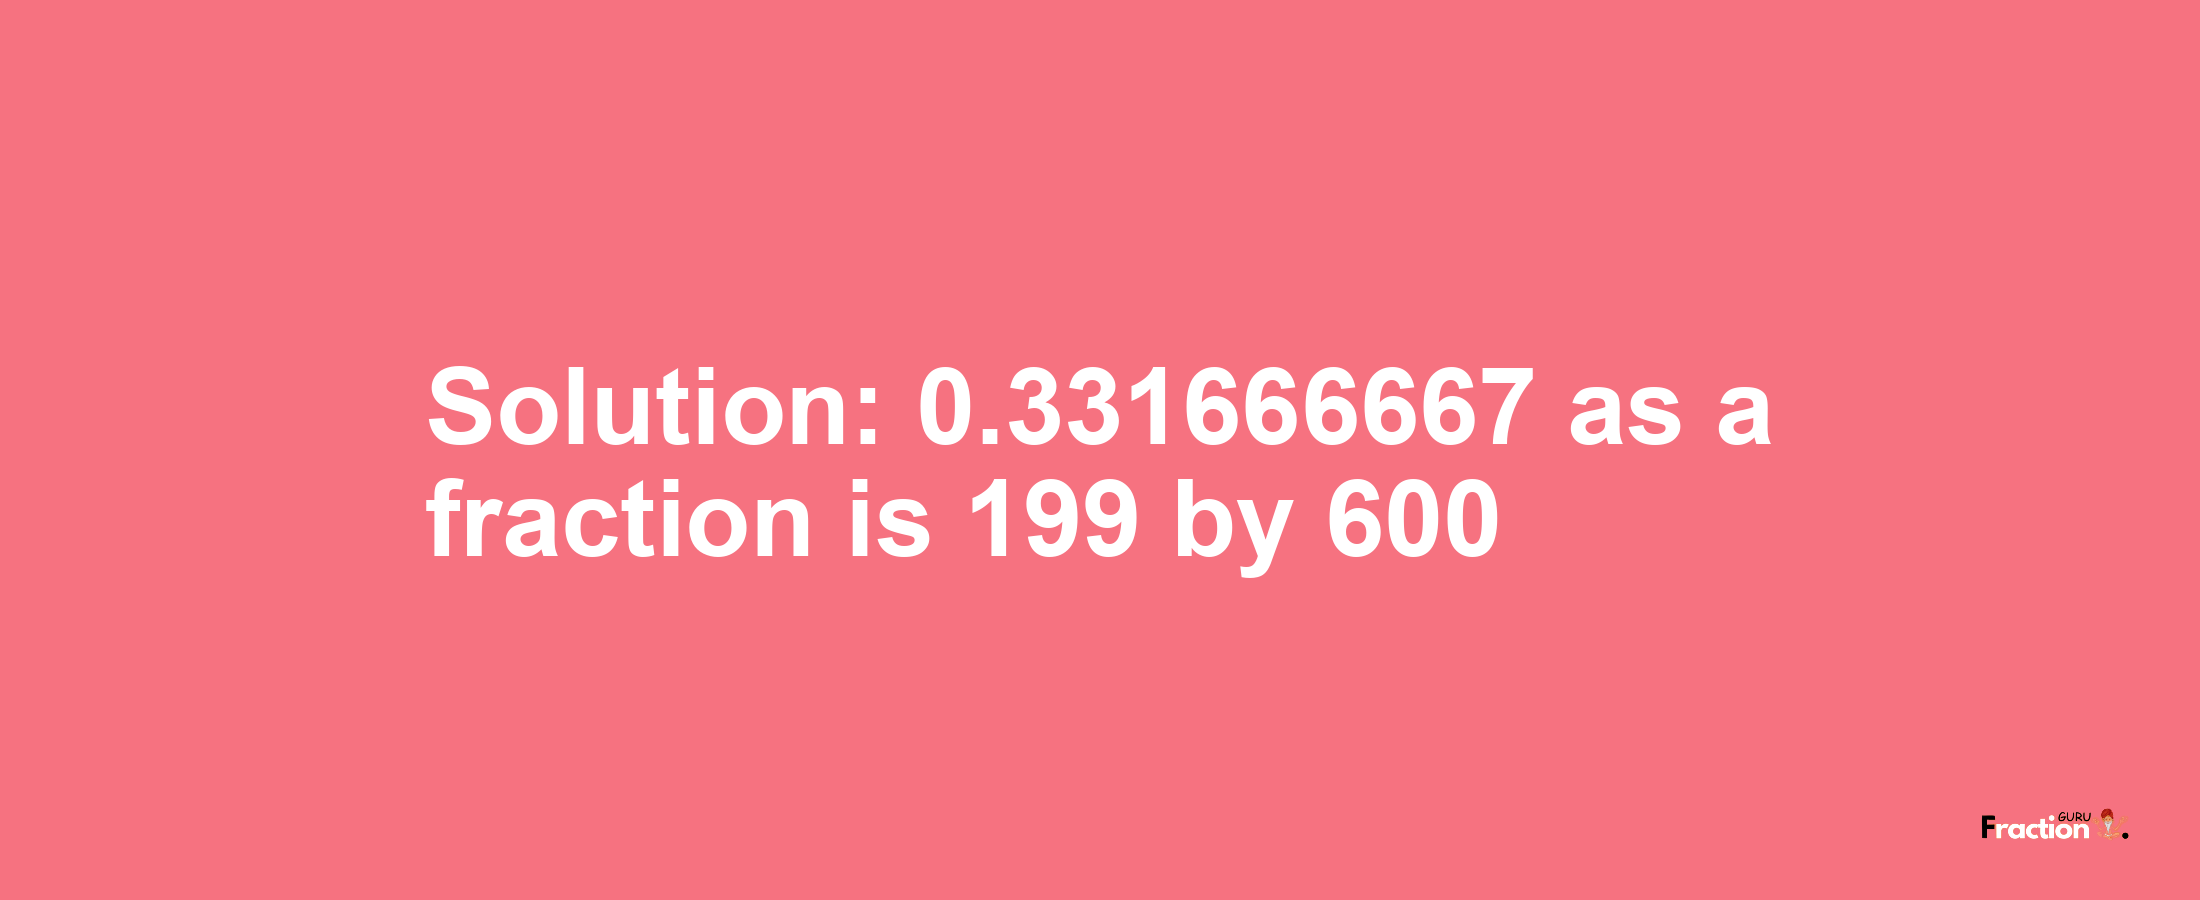 Solution:0.331666667 as a fraction is 199/600